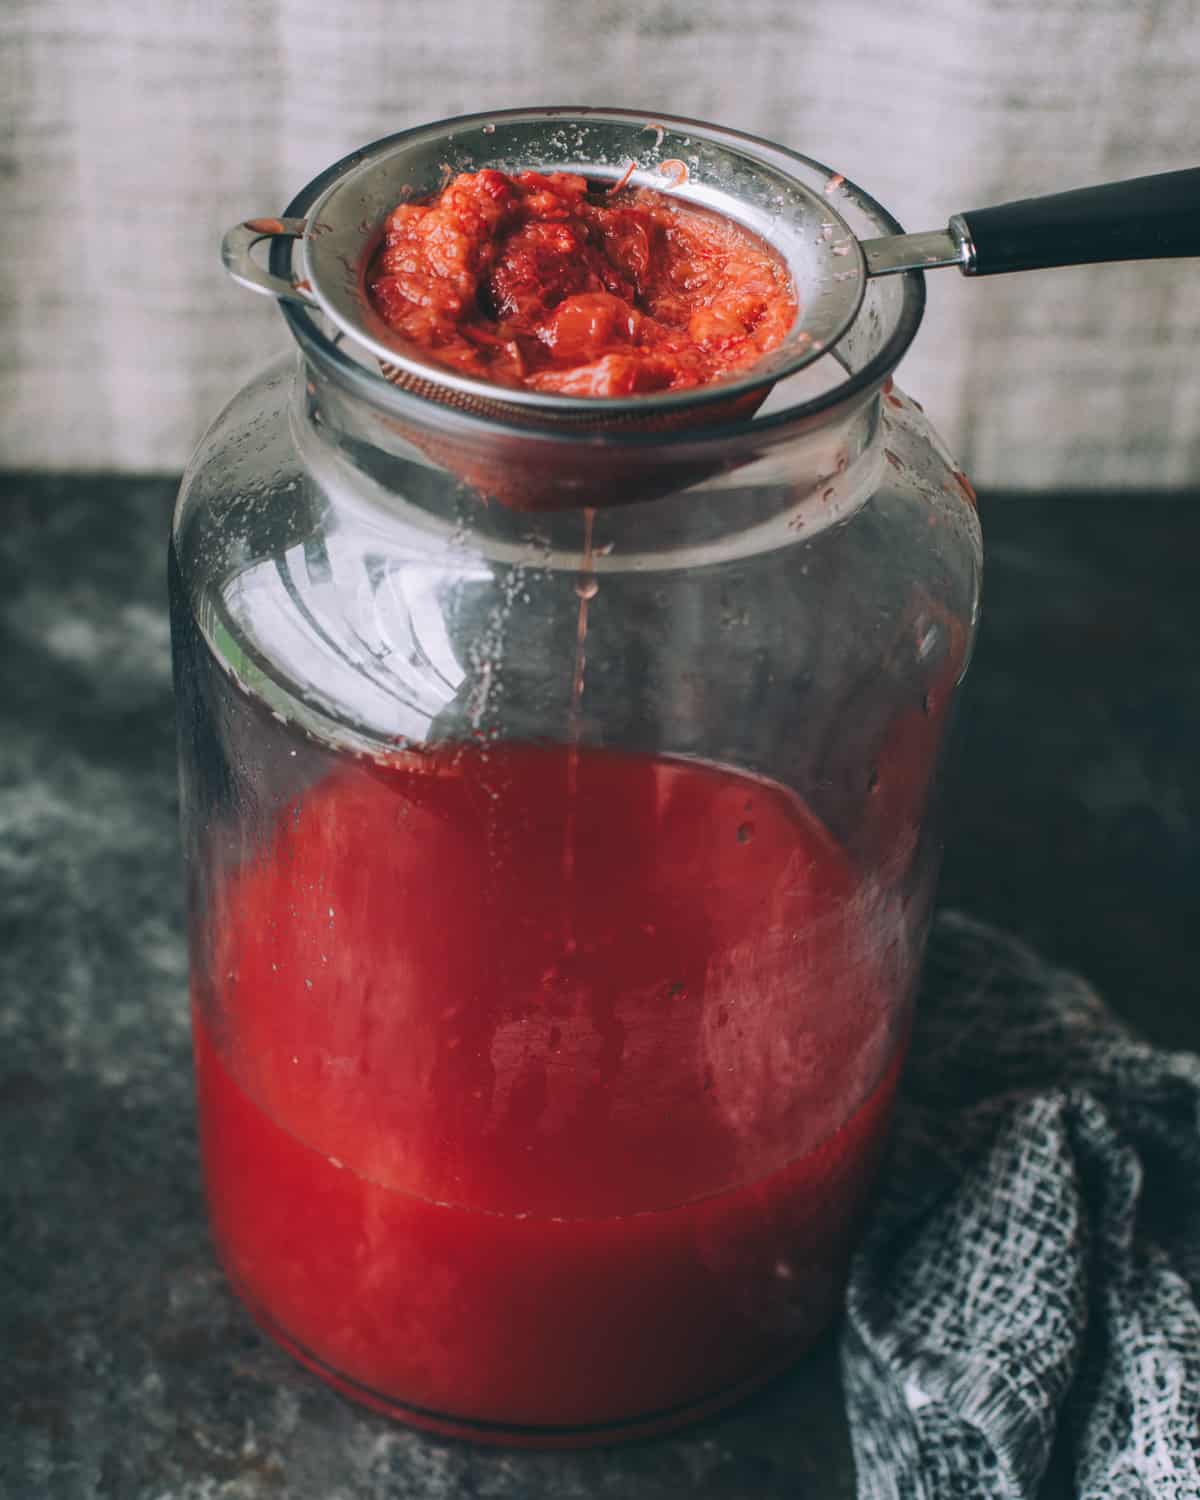 straining the strawberries and rhubarb out of the soda